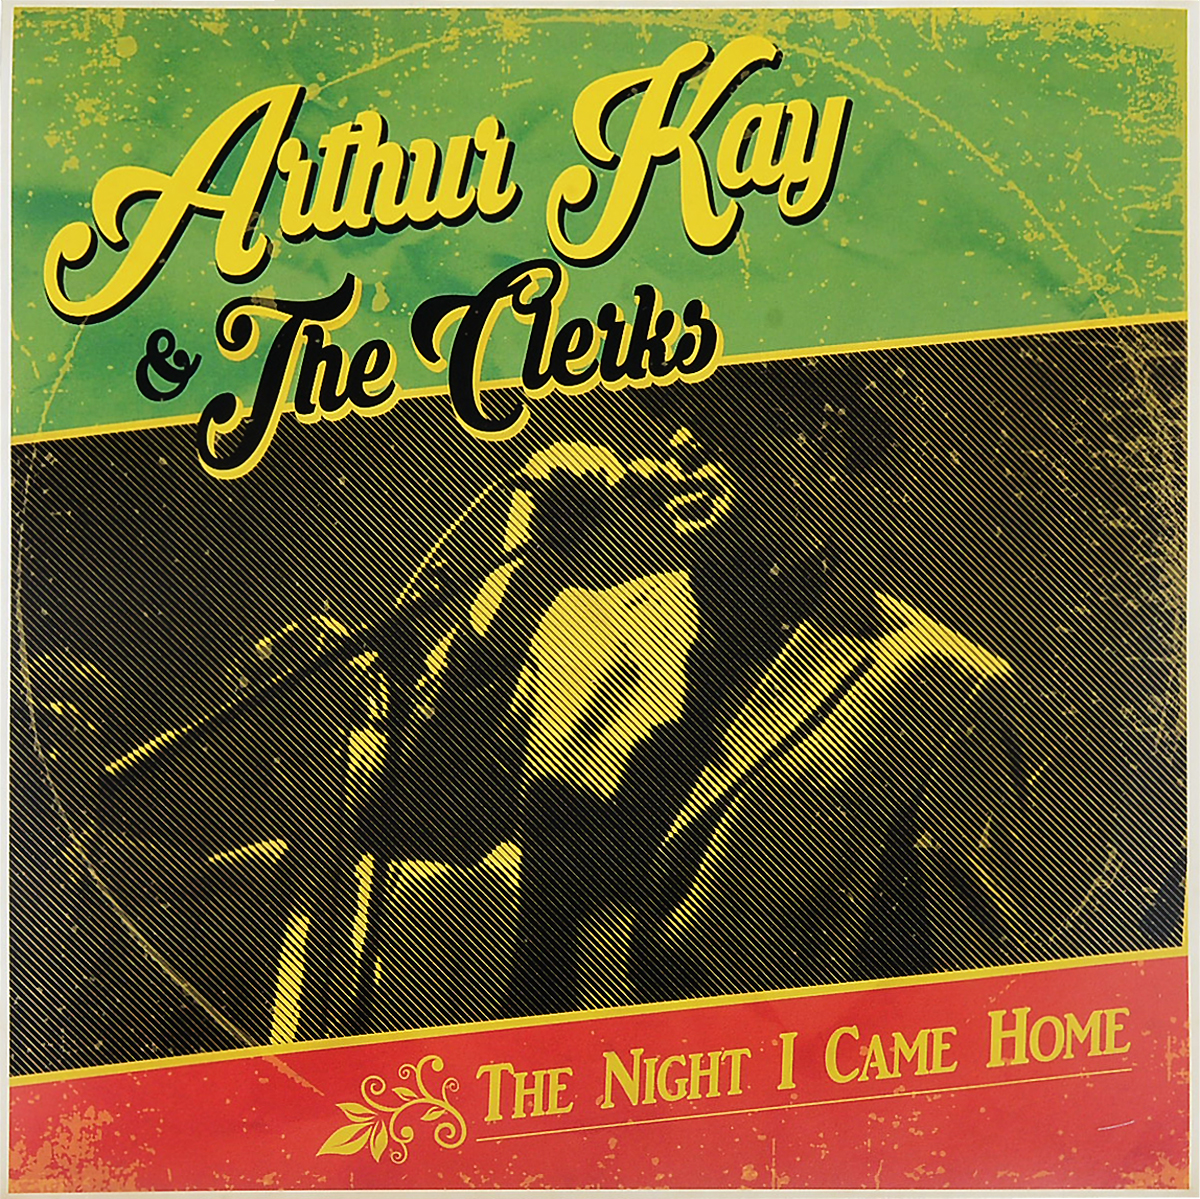 Arthur Kay & The Clerks. The Night I Came Home (LP + CD)